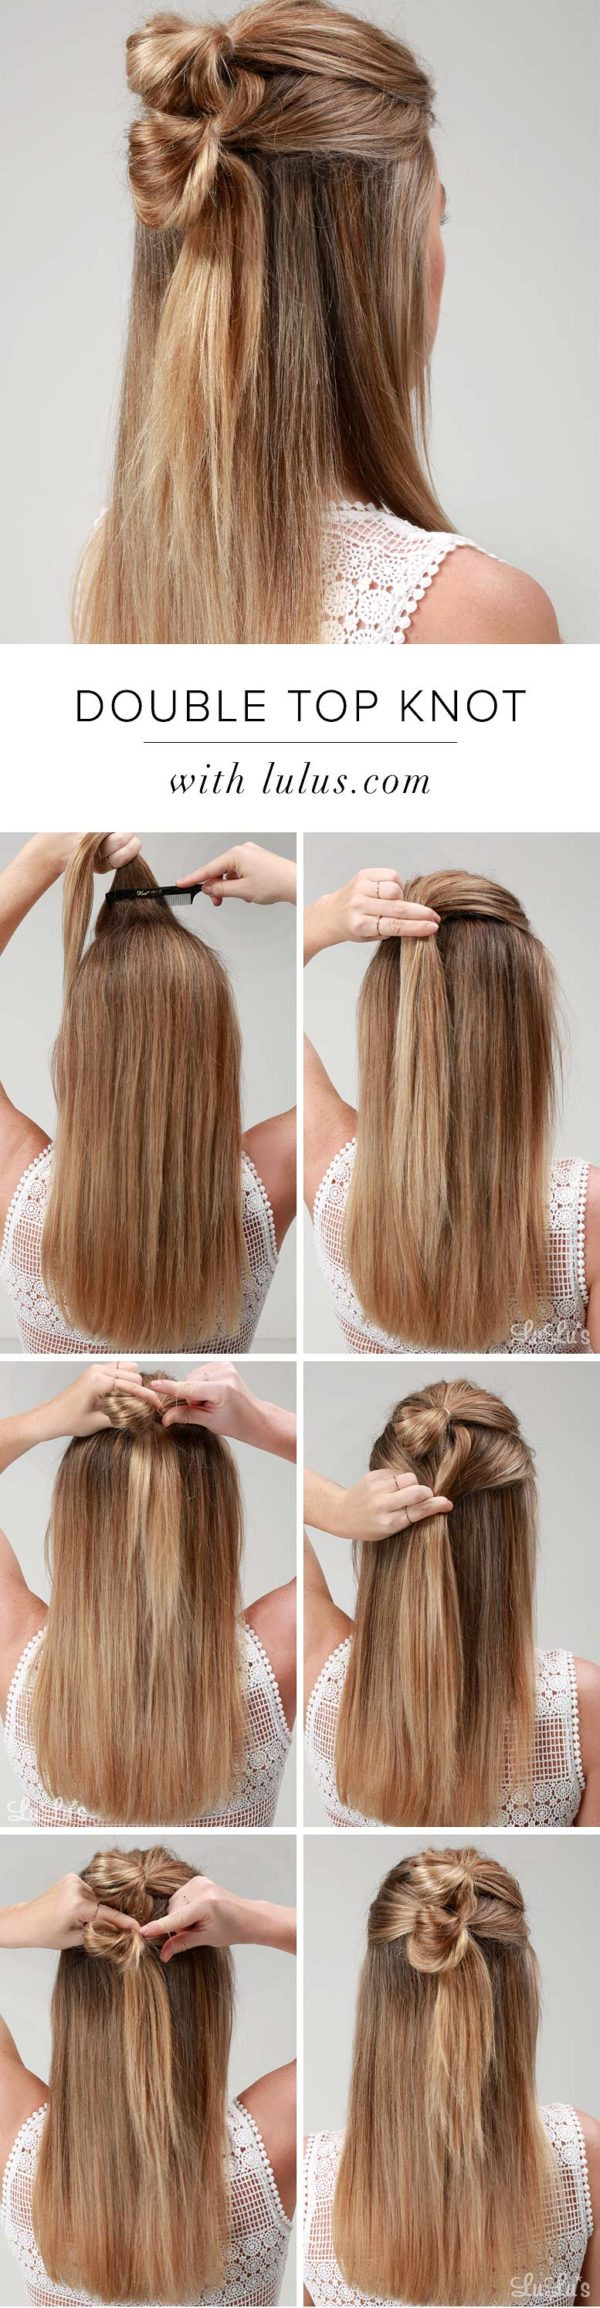 Hairstyle Easy Step By Step
 Easy Step By Step Hairstyle Tutorials You Can Do For Less